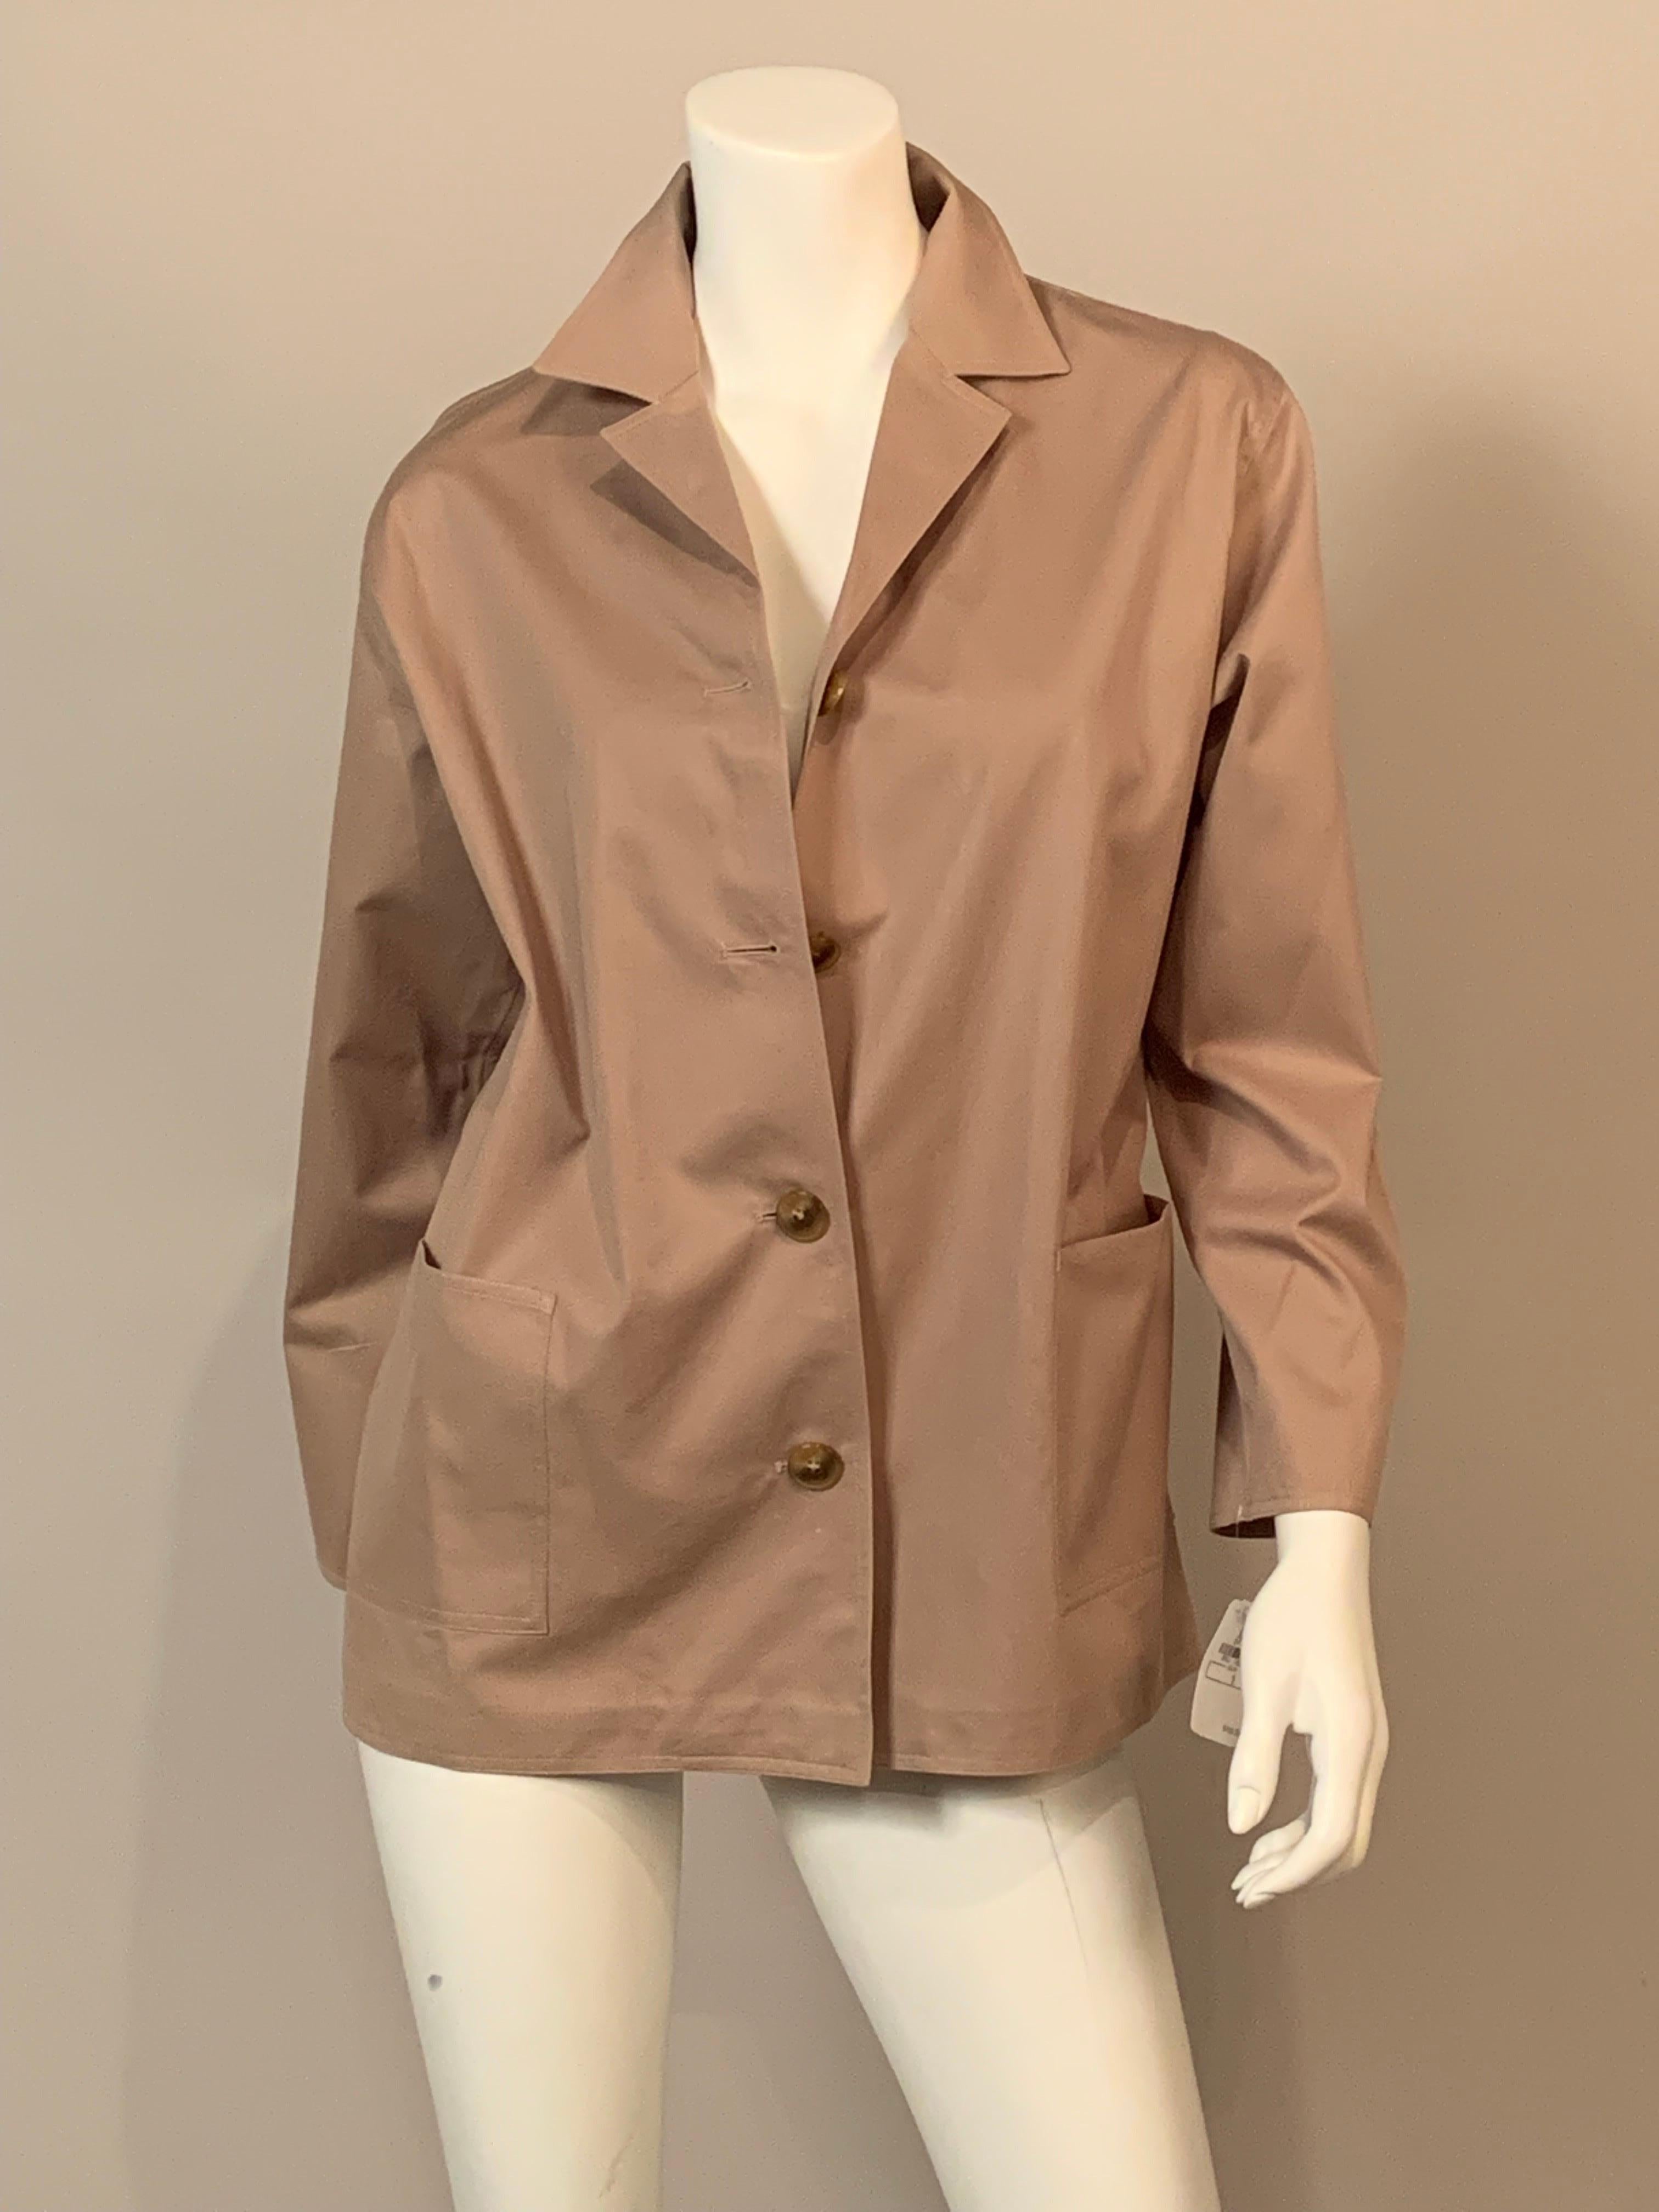 Women's Shamask Safari Style Cotton Jacket with Original Price Tag For Sale